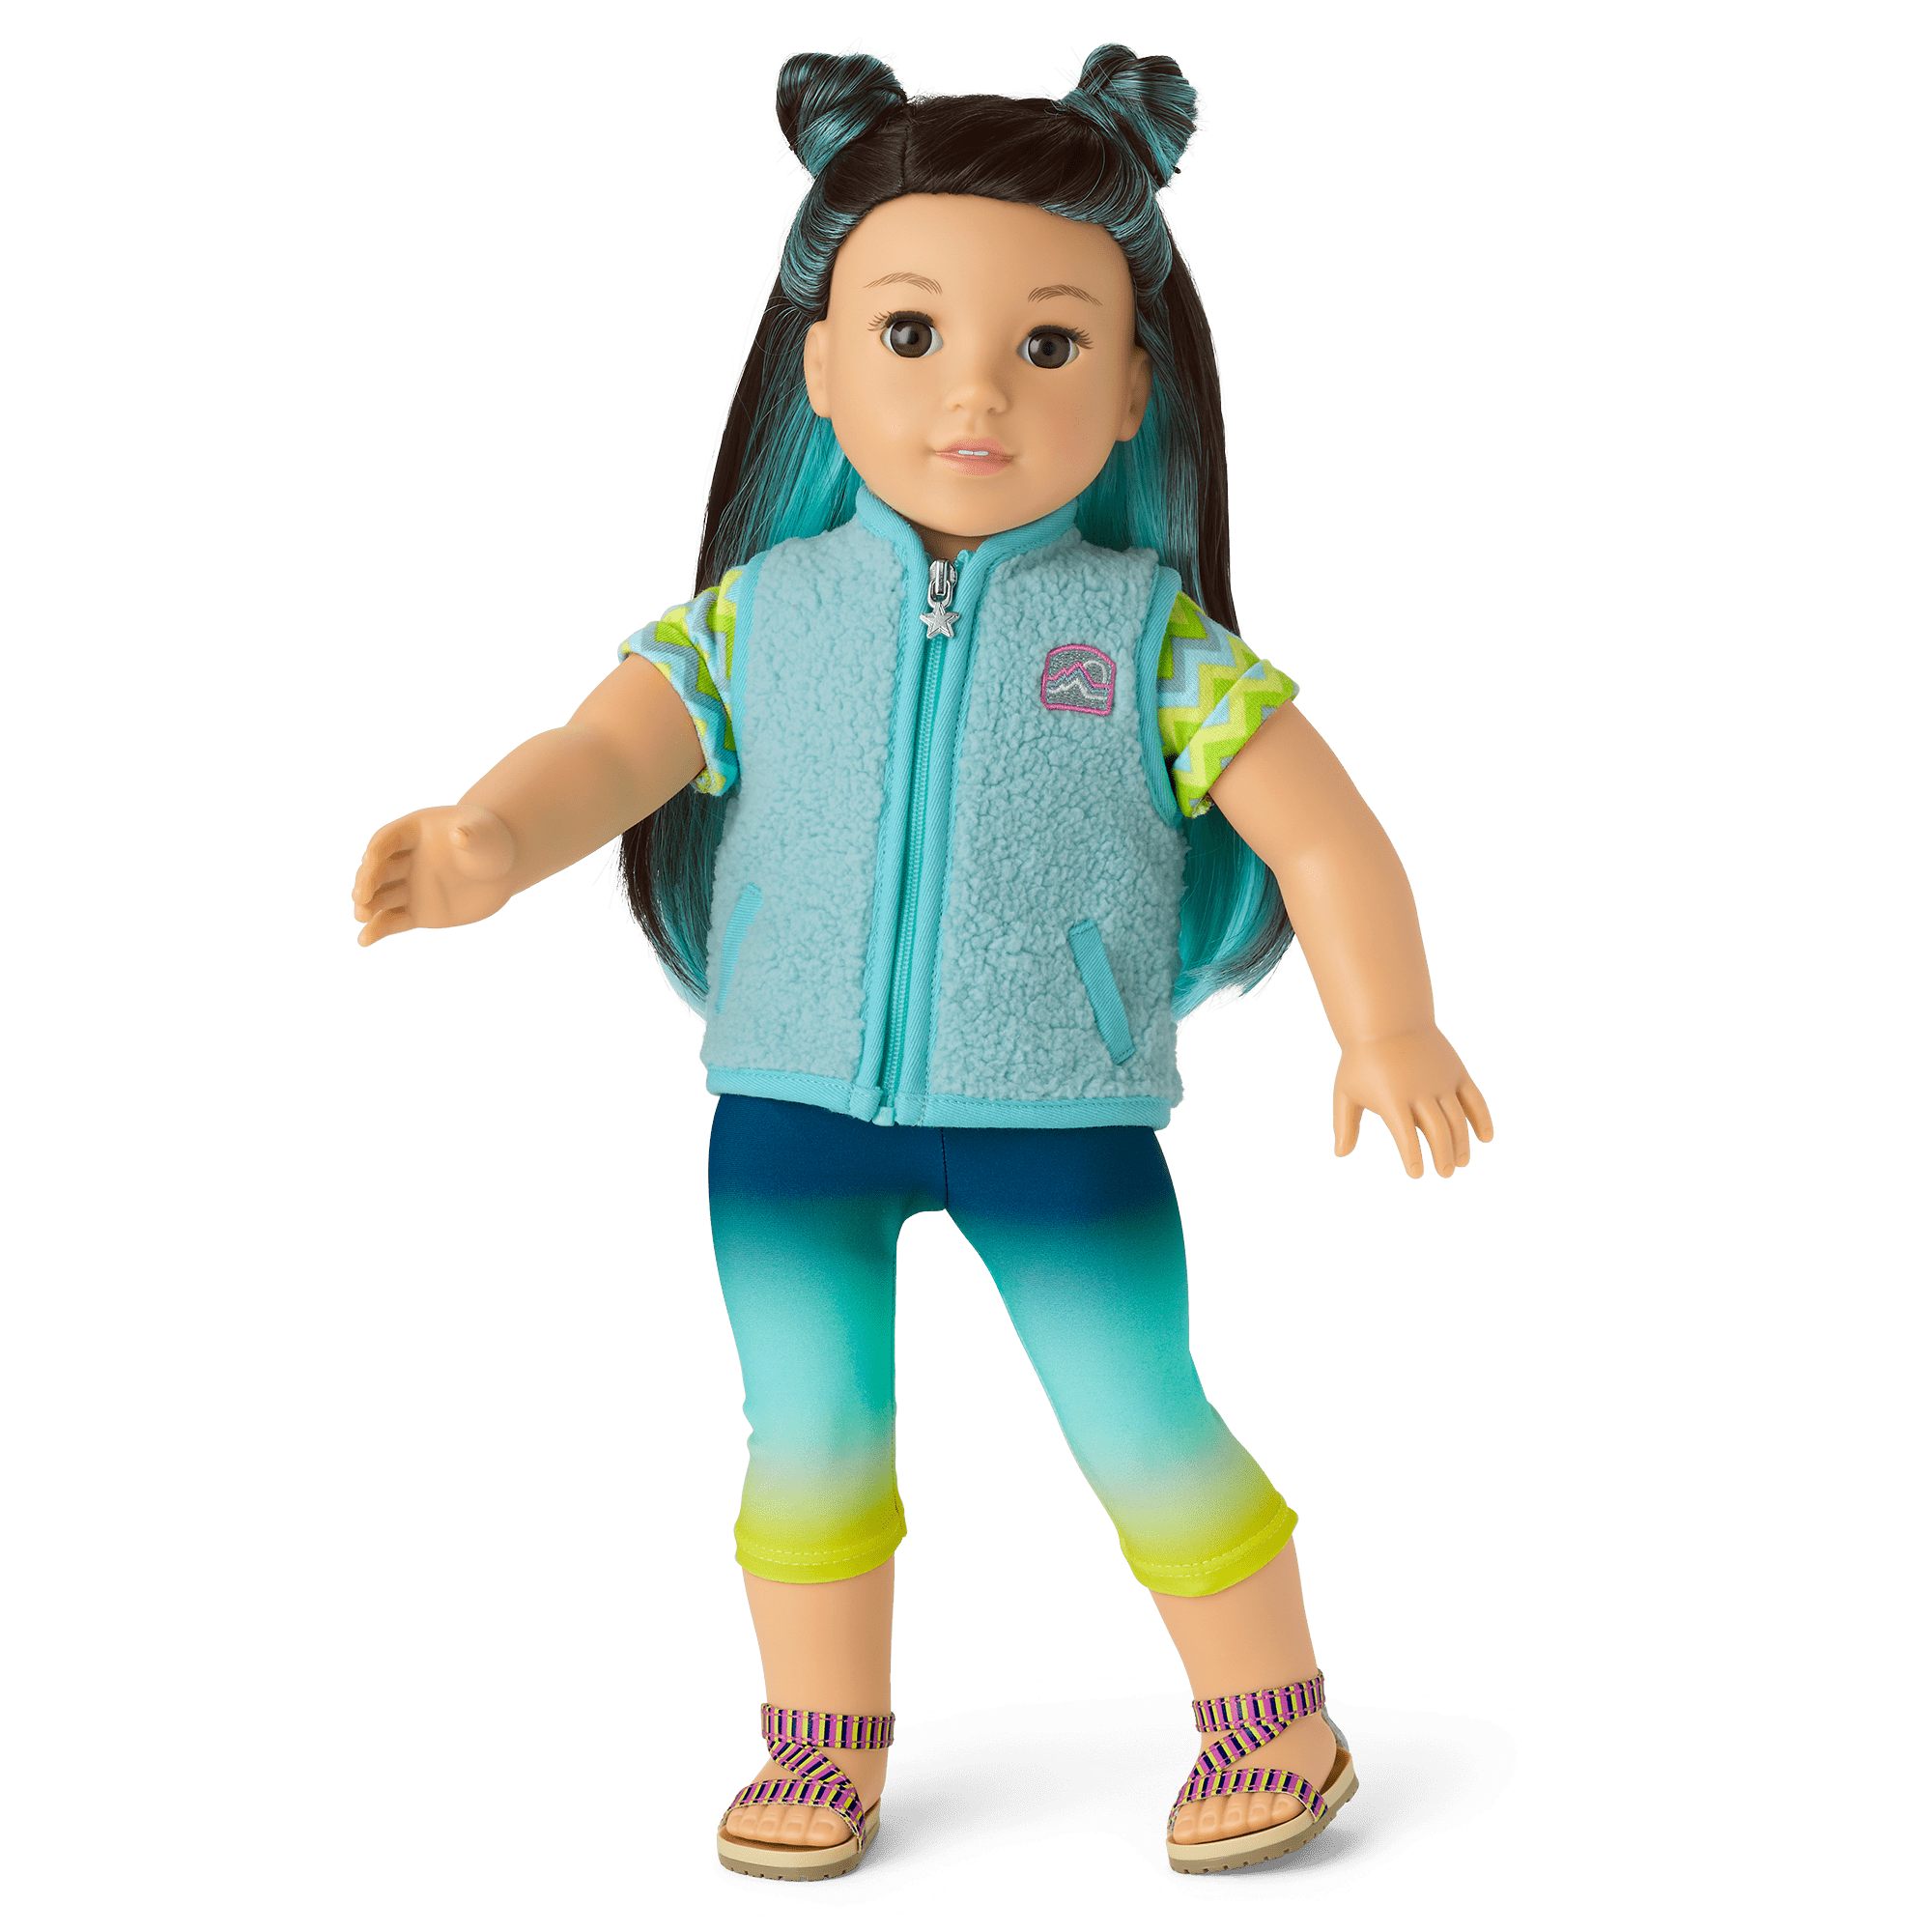 Corinne's™ Camping Outfit for 18-inch Dolls